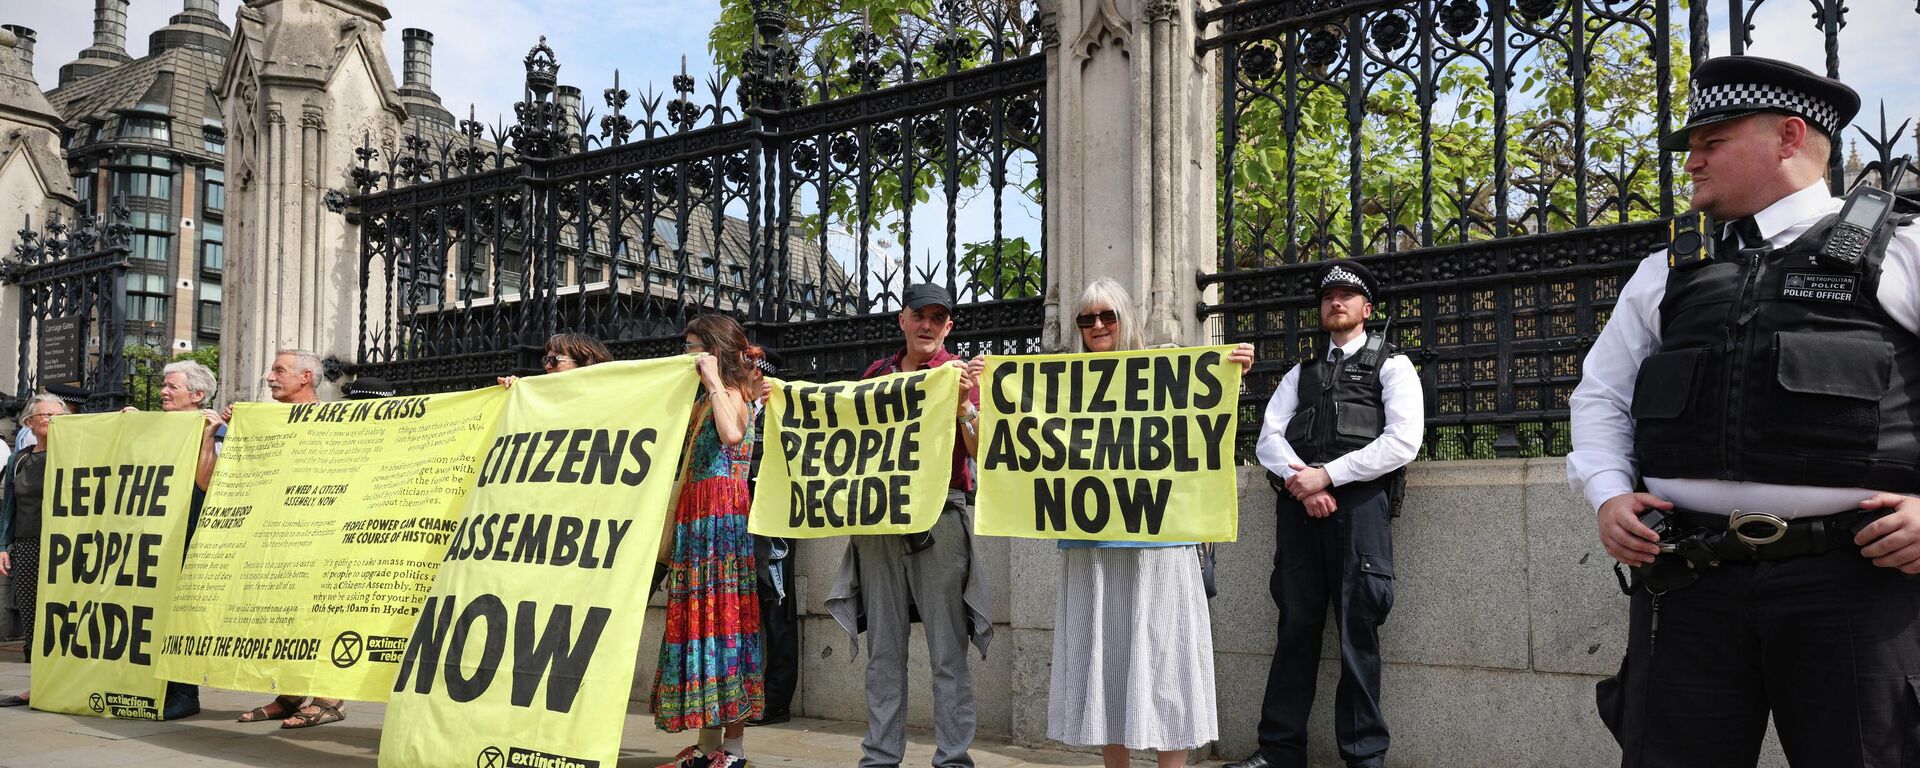 Extinction Rebellion activists hold banners outside of Britain's Houses of Parliament - Sputnik International, 1920, 02.09.2022